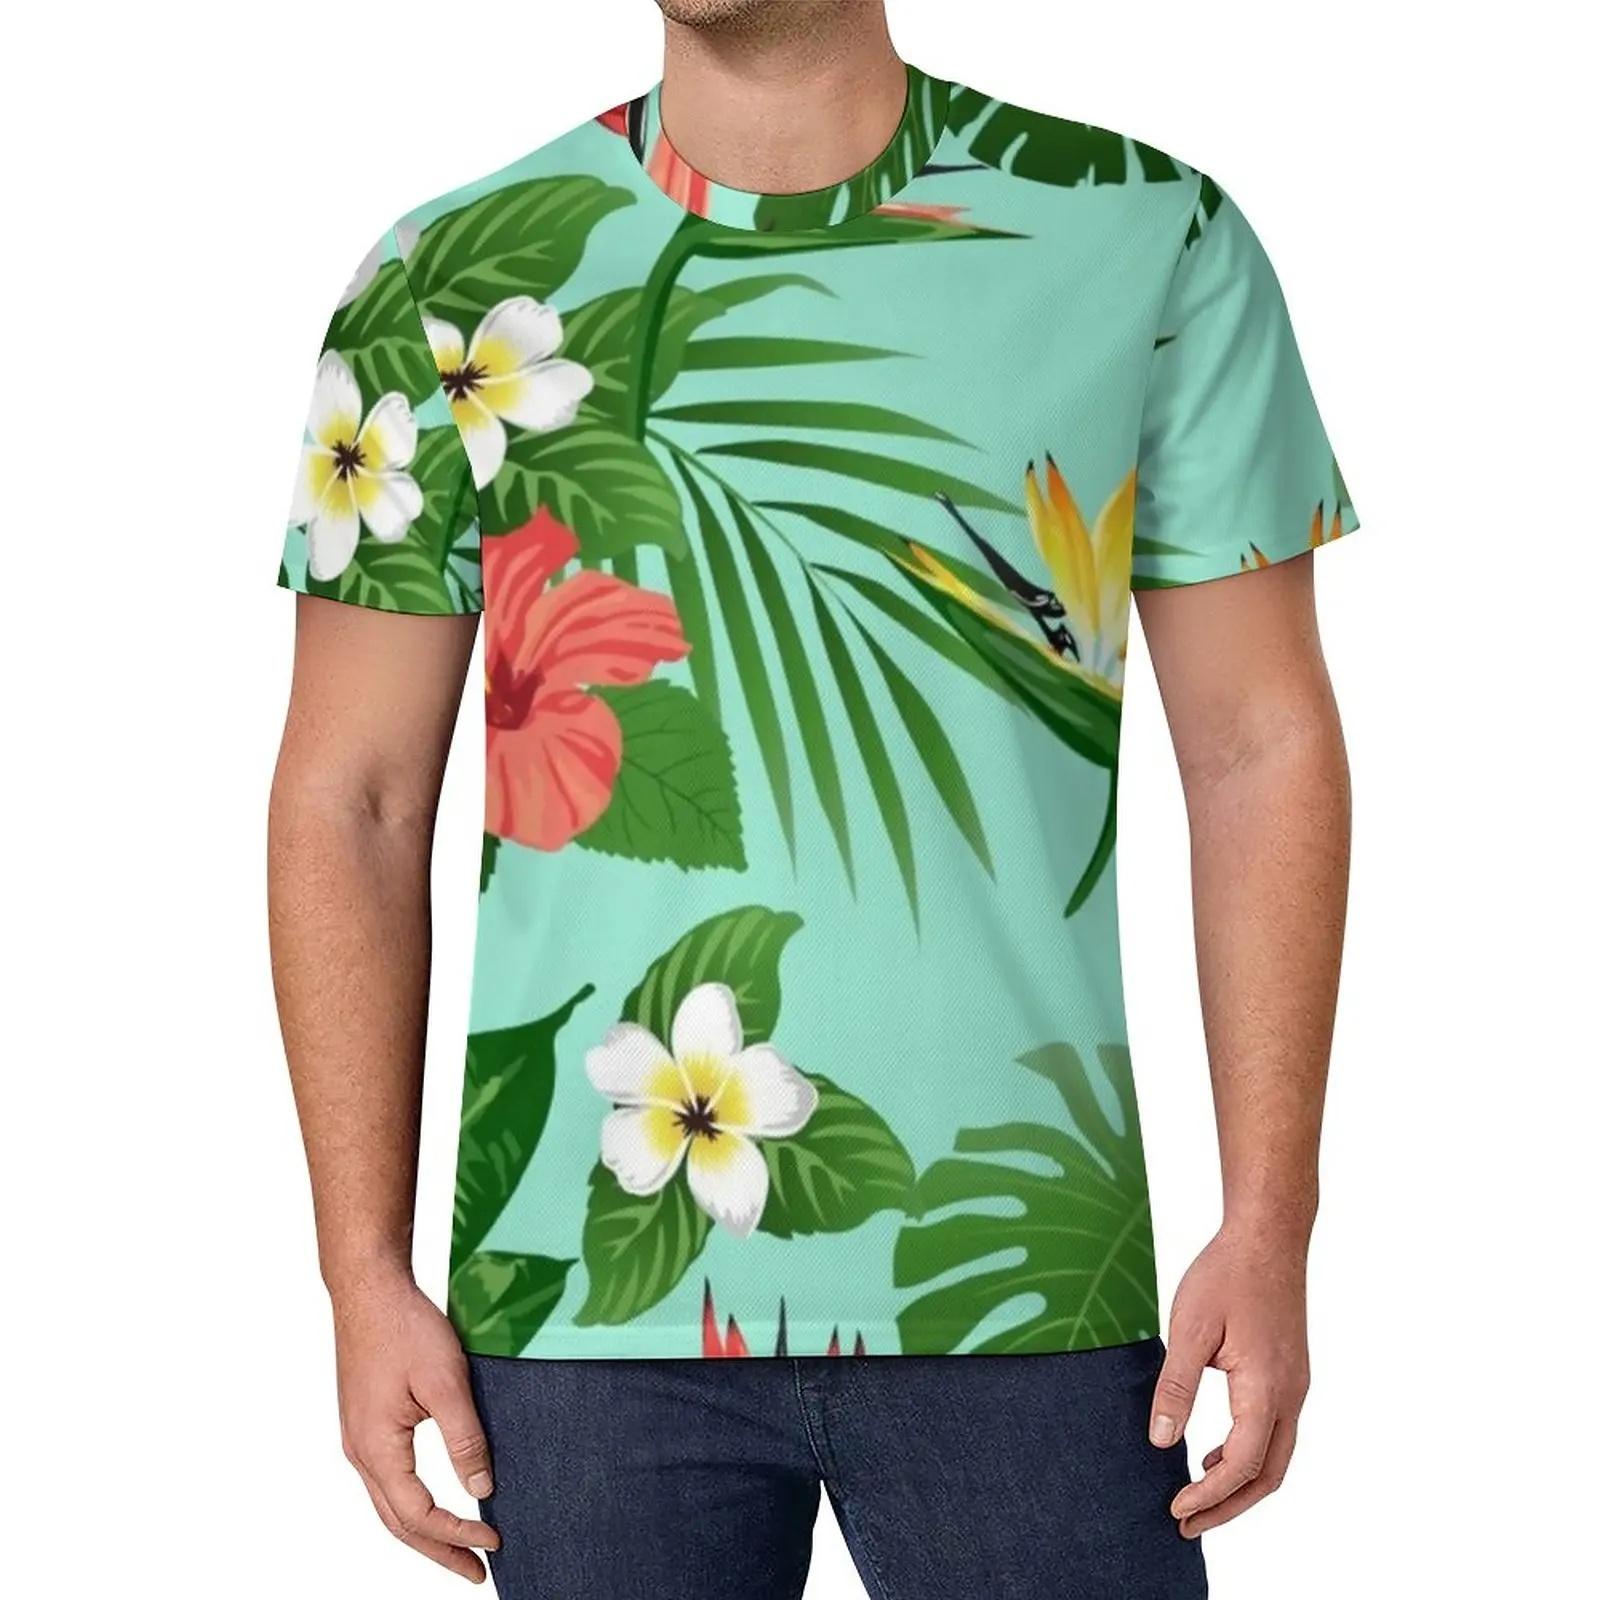 

Gorgeous Tropical Floral T Shirt Hawaii Flower Fashion T-Shirts Summer Pattern Tees Streetwear Clothes Gift